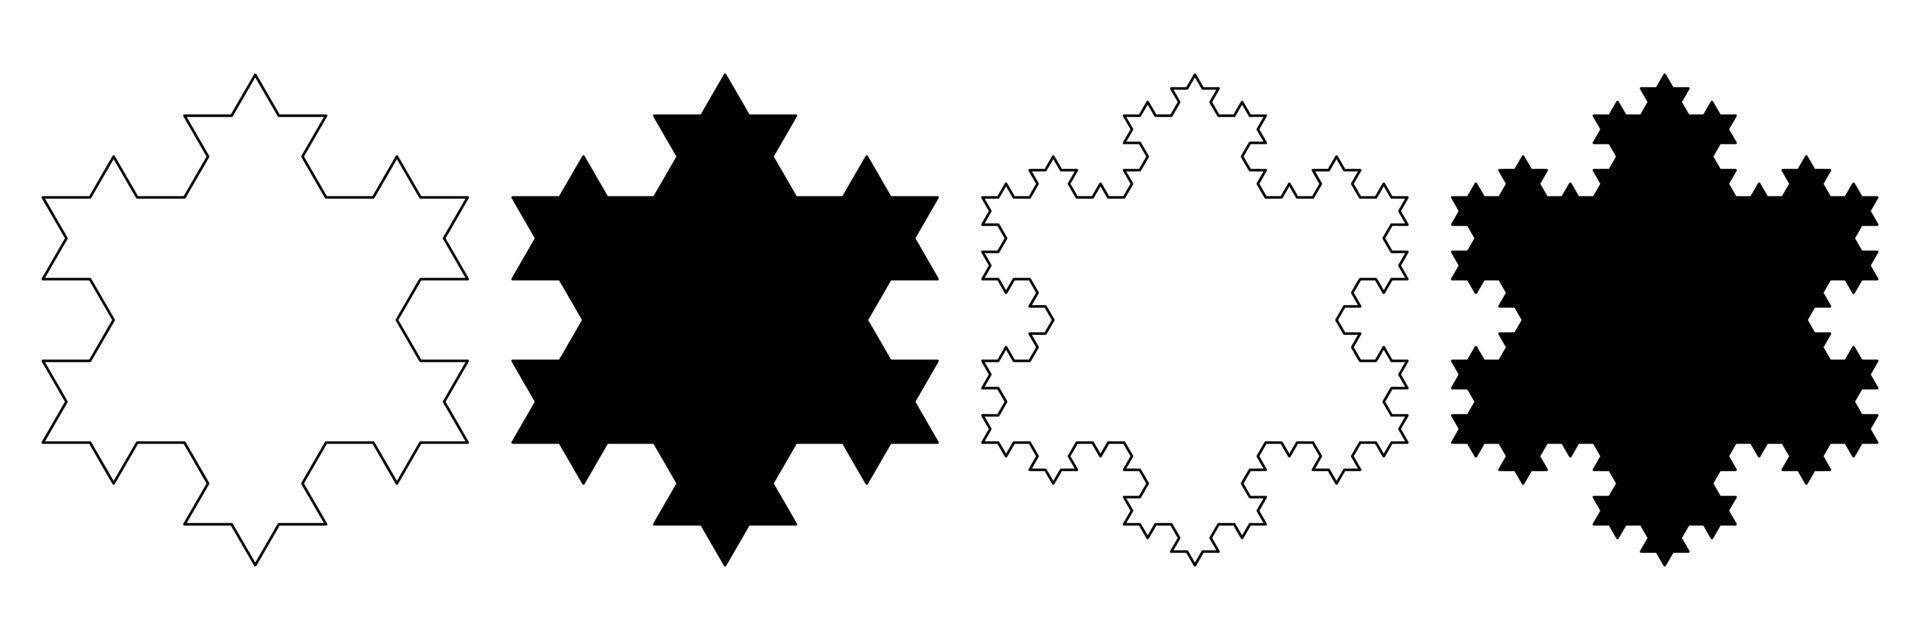 outline silhouette Koch snowflake icon isolated on white background vector